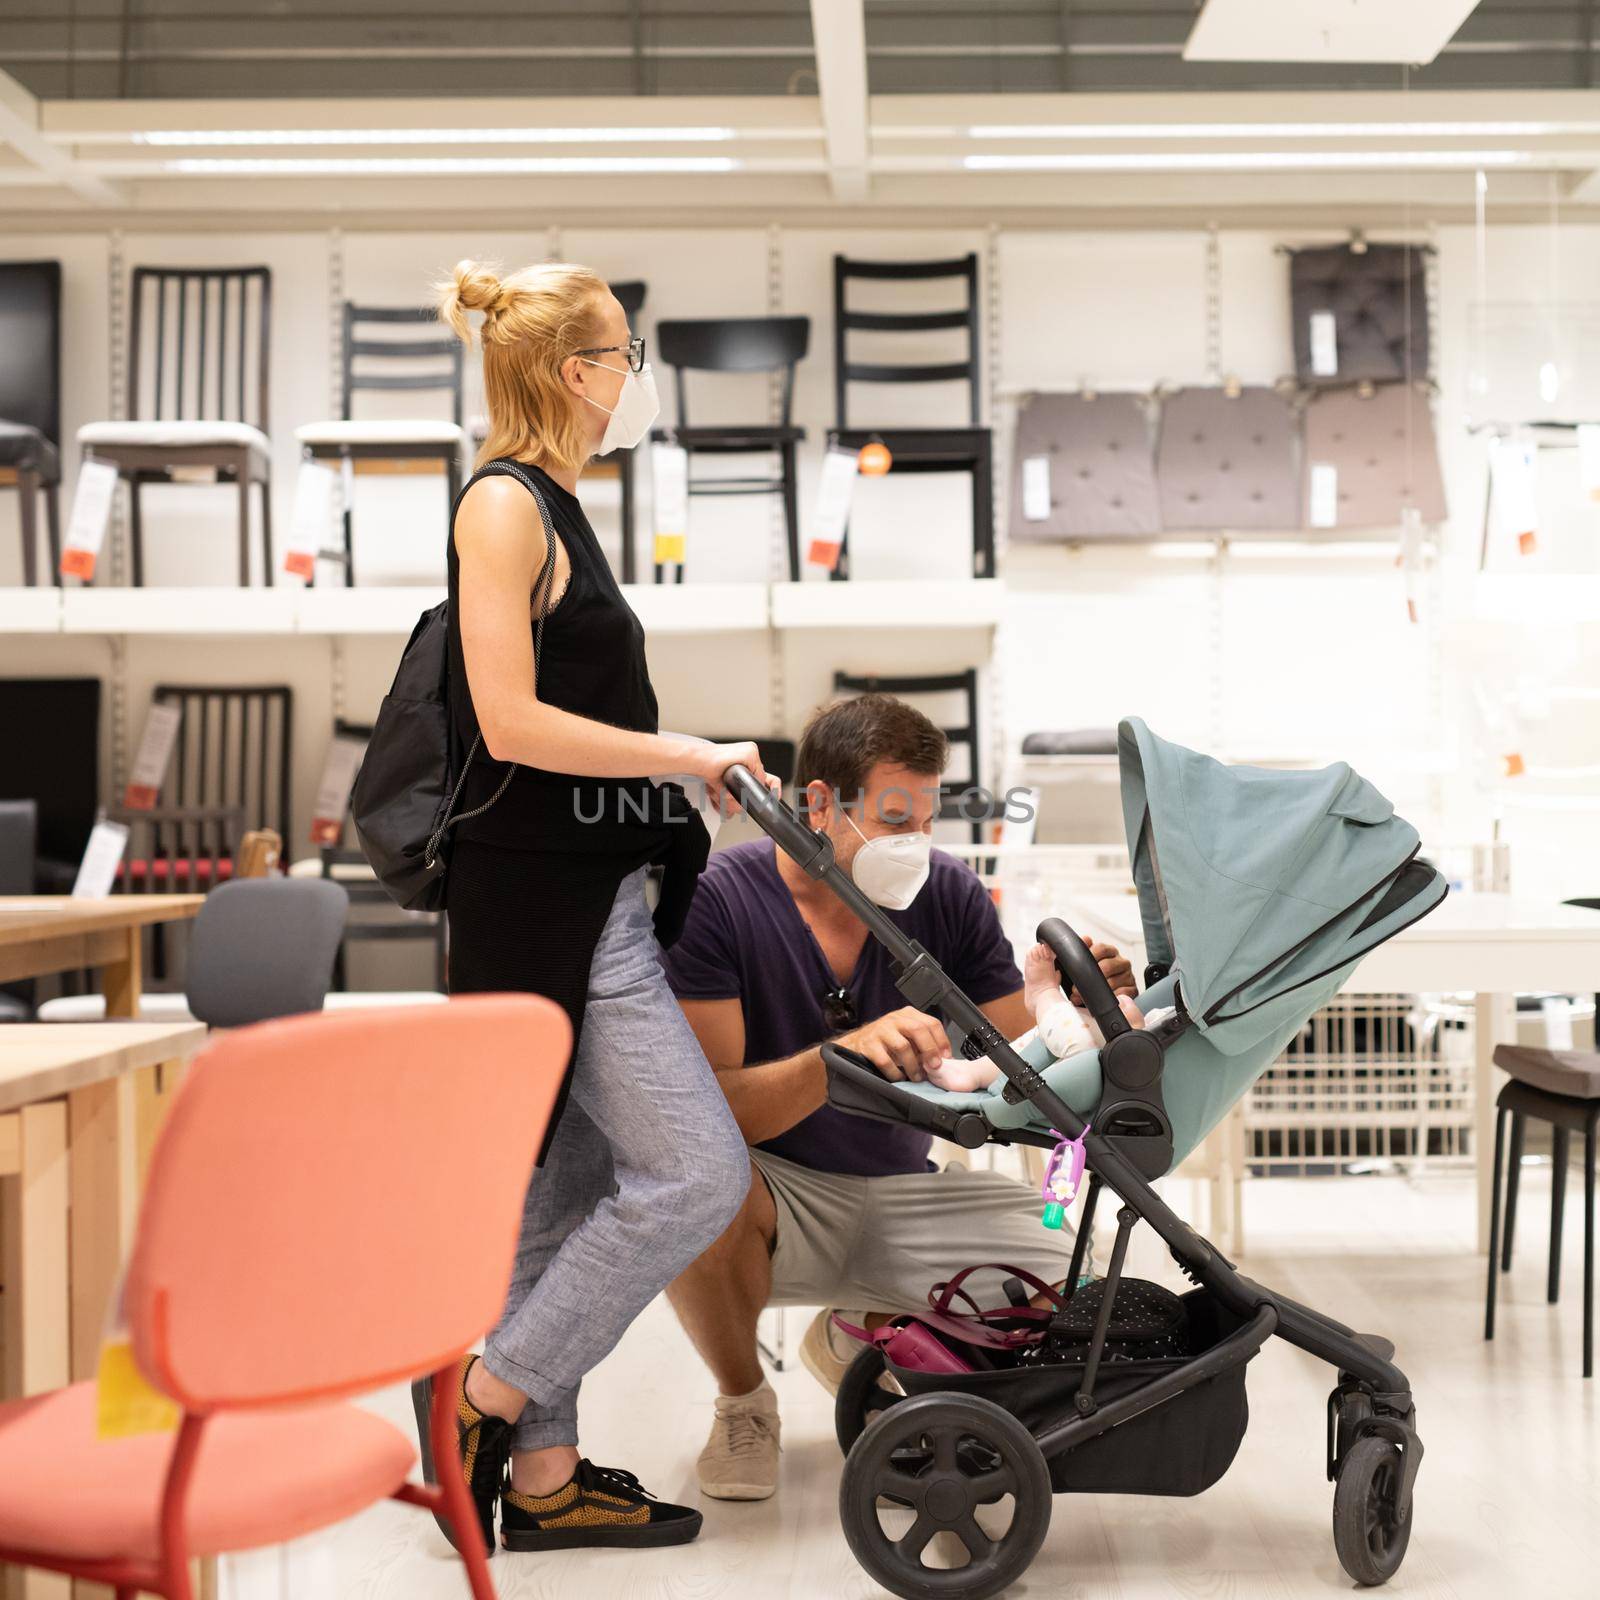 Young family with newborn in stroller shopping at retail furniture and home accessories store wearing protective medical face mask to prevent spreading of corona virus when shops reopen.